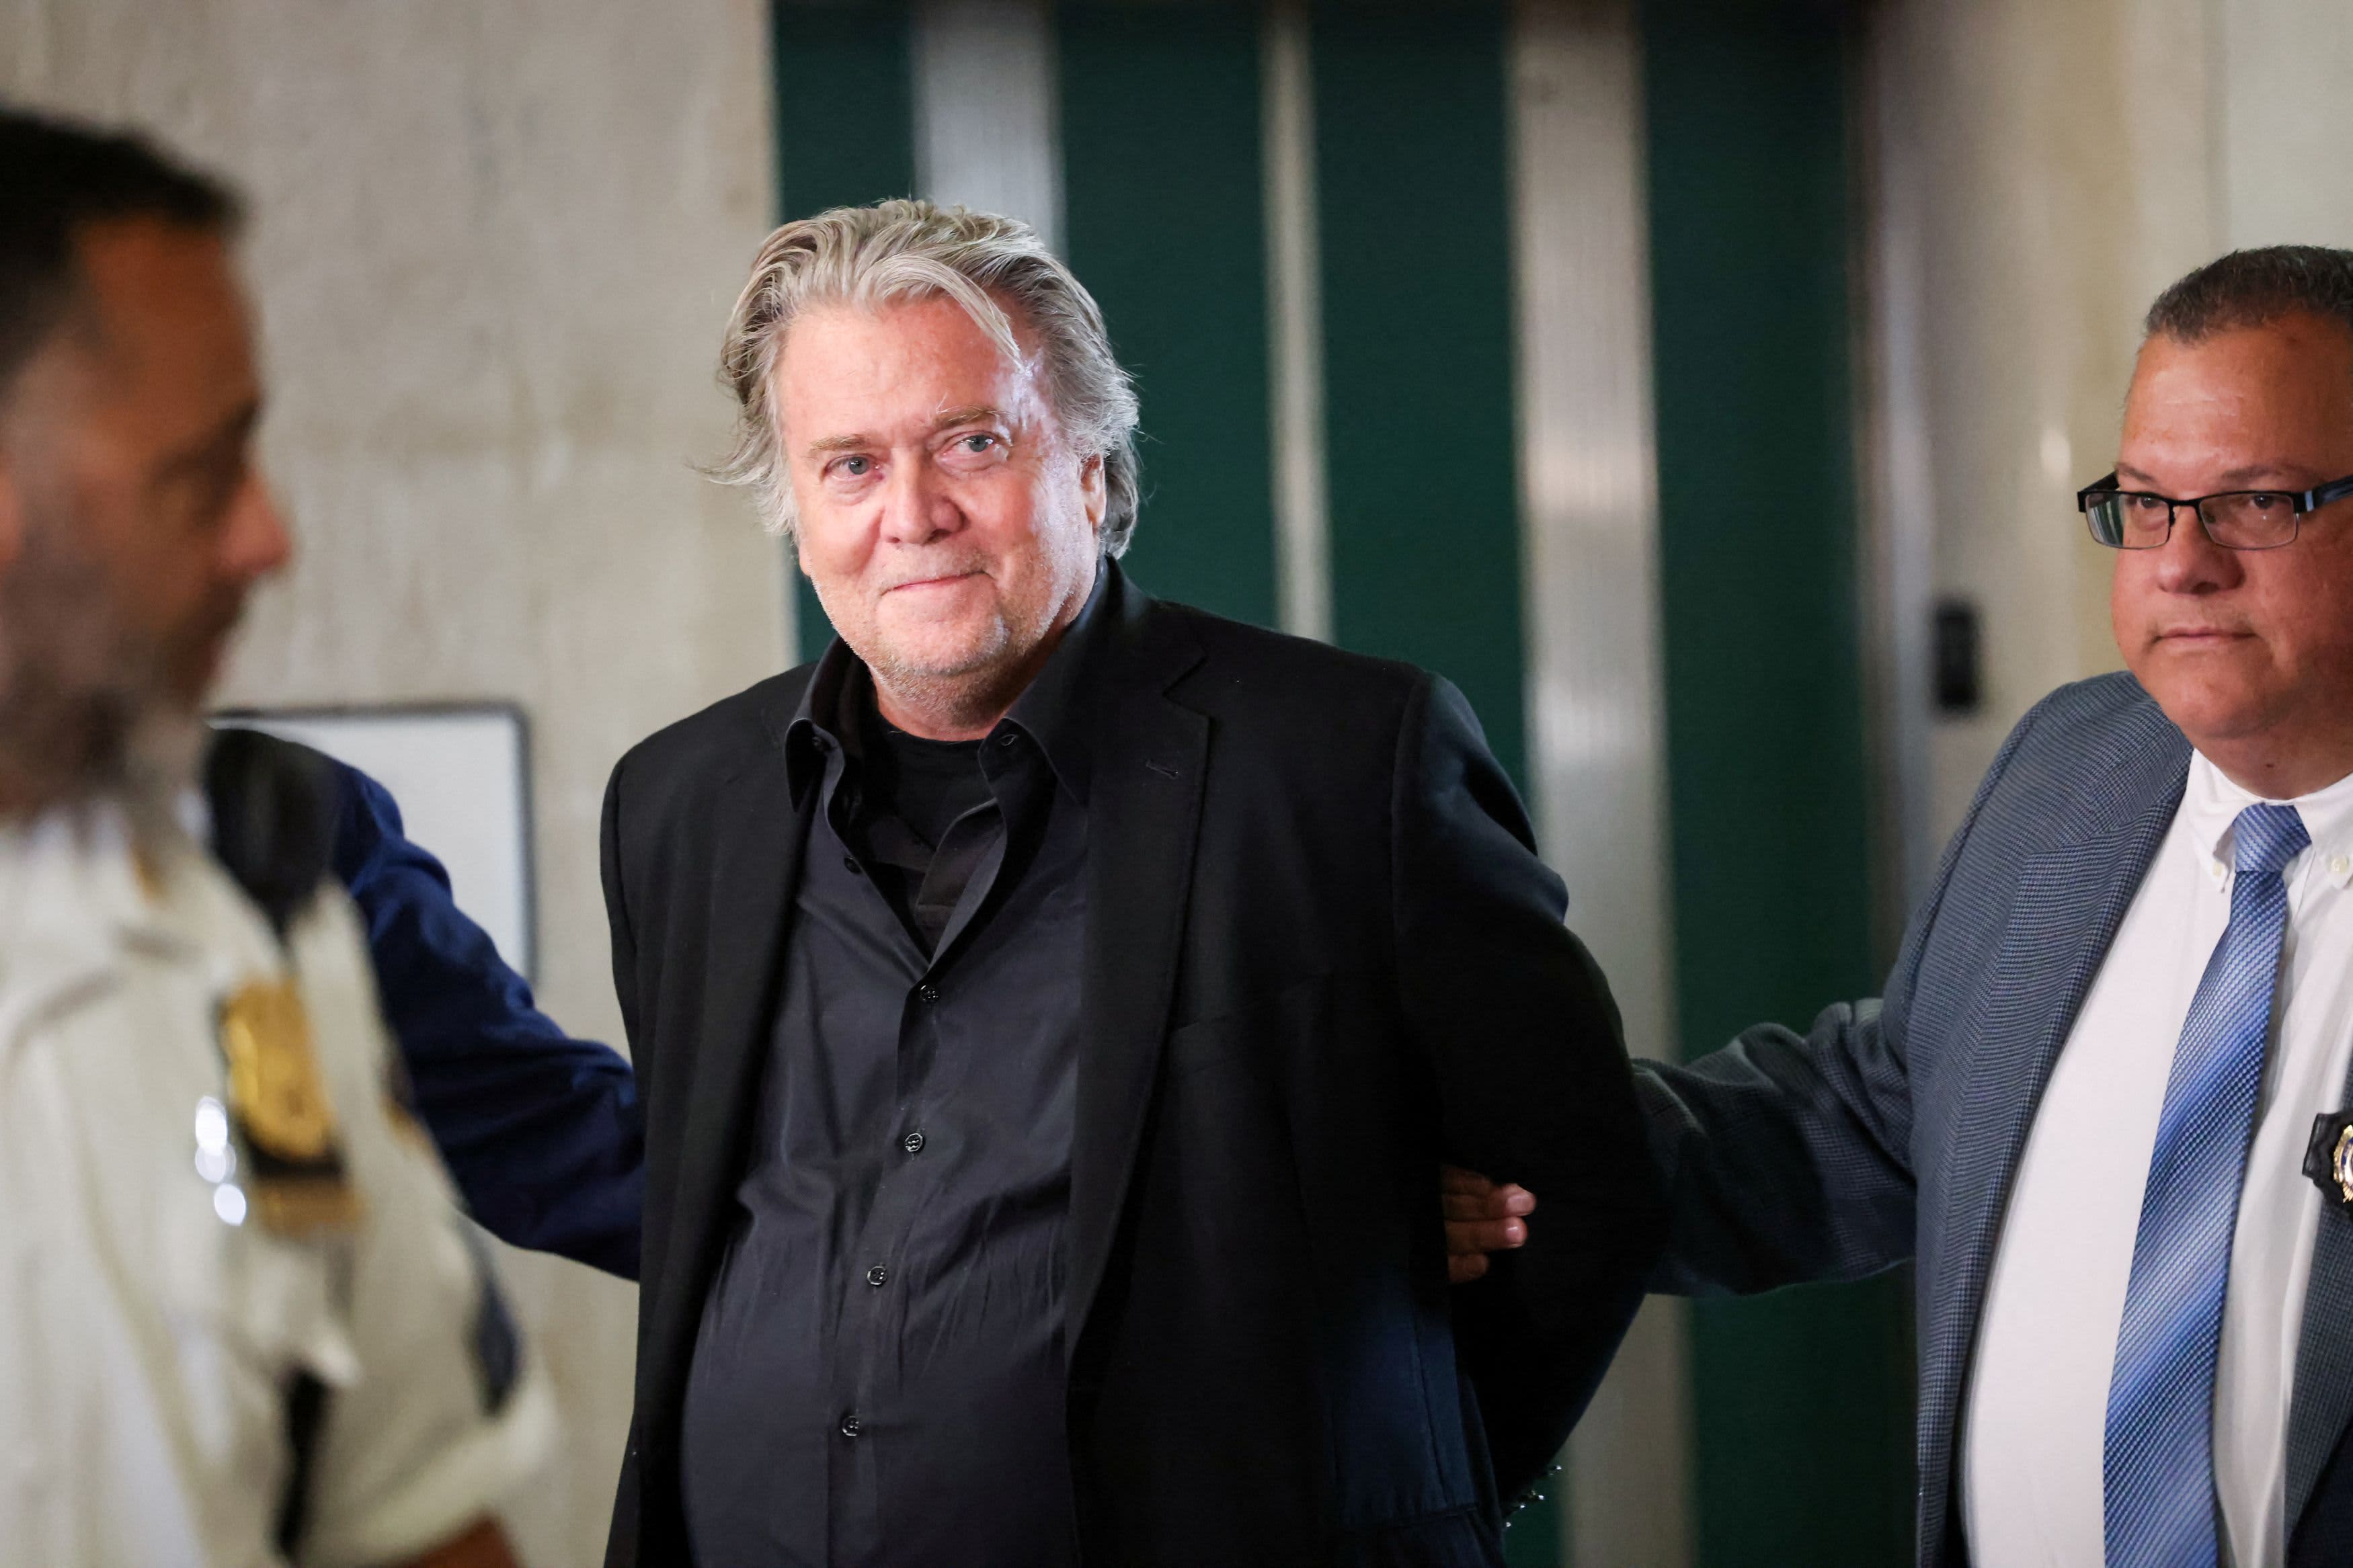 Steve Bannon: Donald Trump aide charged in border wall scam